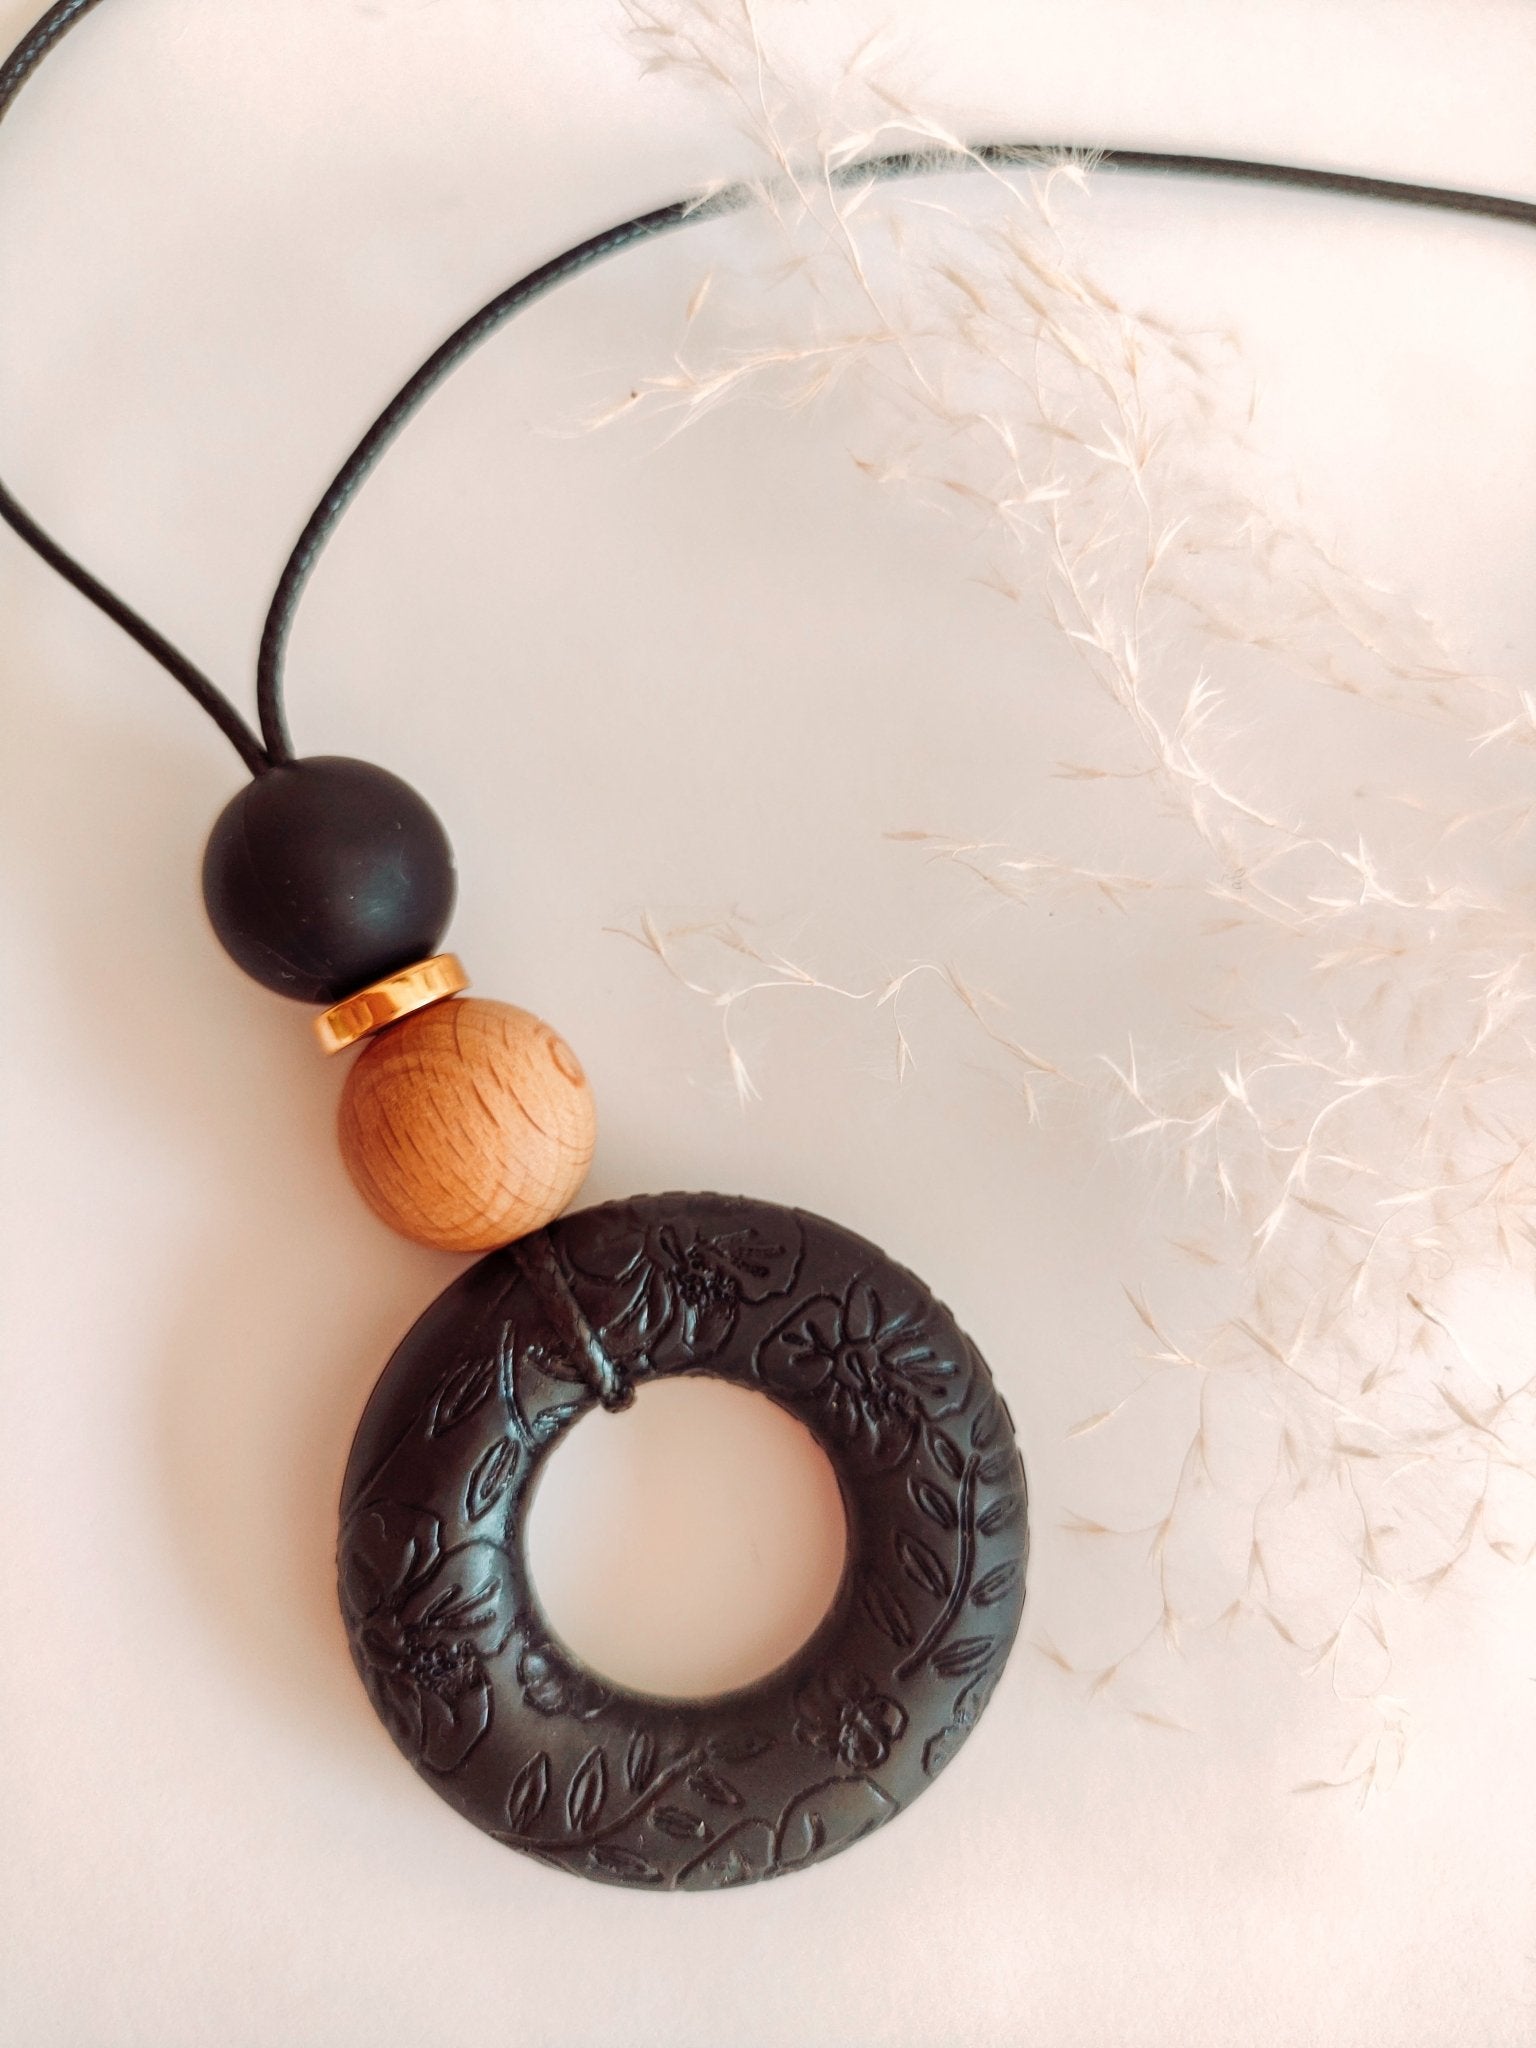 Embossed Soft Bloom Black Pendant - Bennie Blooms Breastfeeding, Teething and Fiddle Jewellery at its finest.